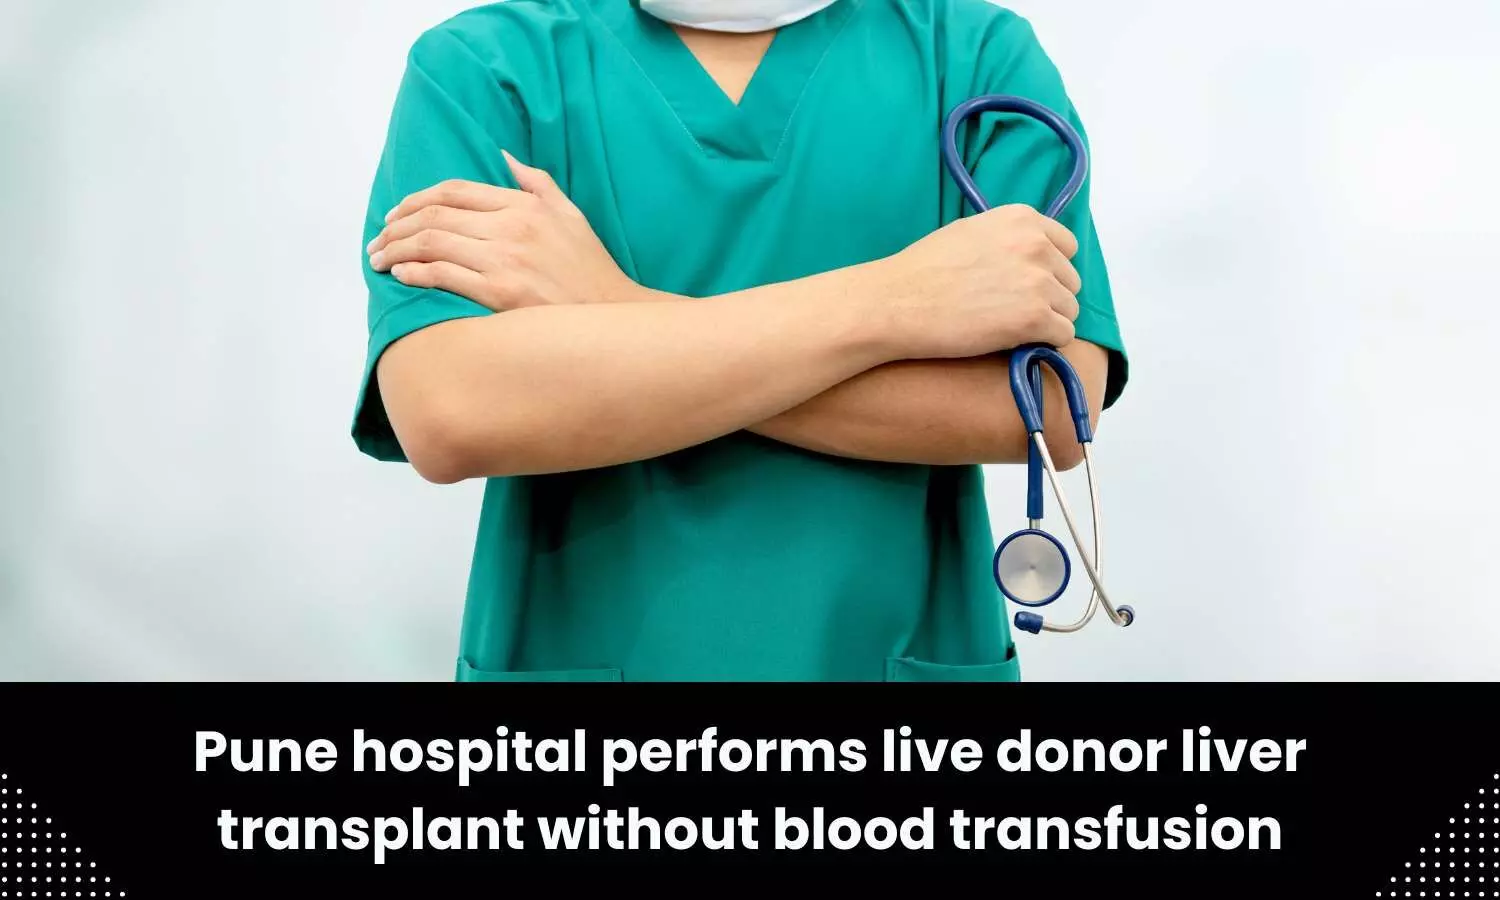 Pune hospital performs live donor liver transplant without blood transfusion